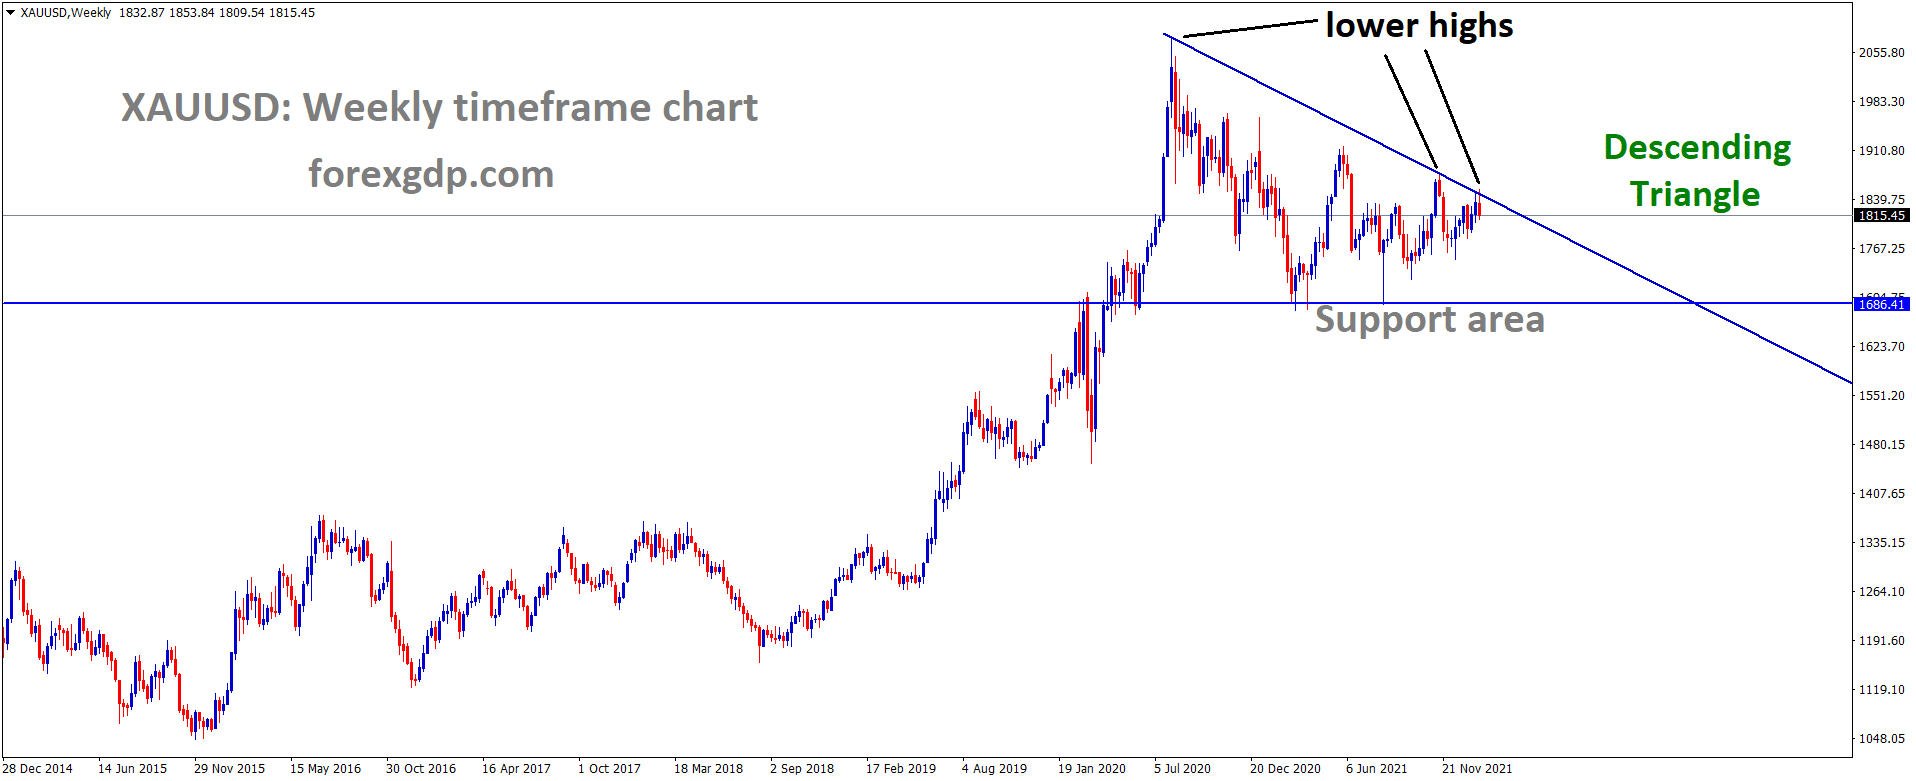 XAUUSD Gold price has fallen from the lower high area of the Descending triangle pattern.